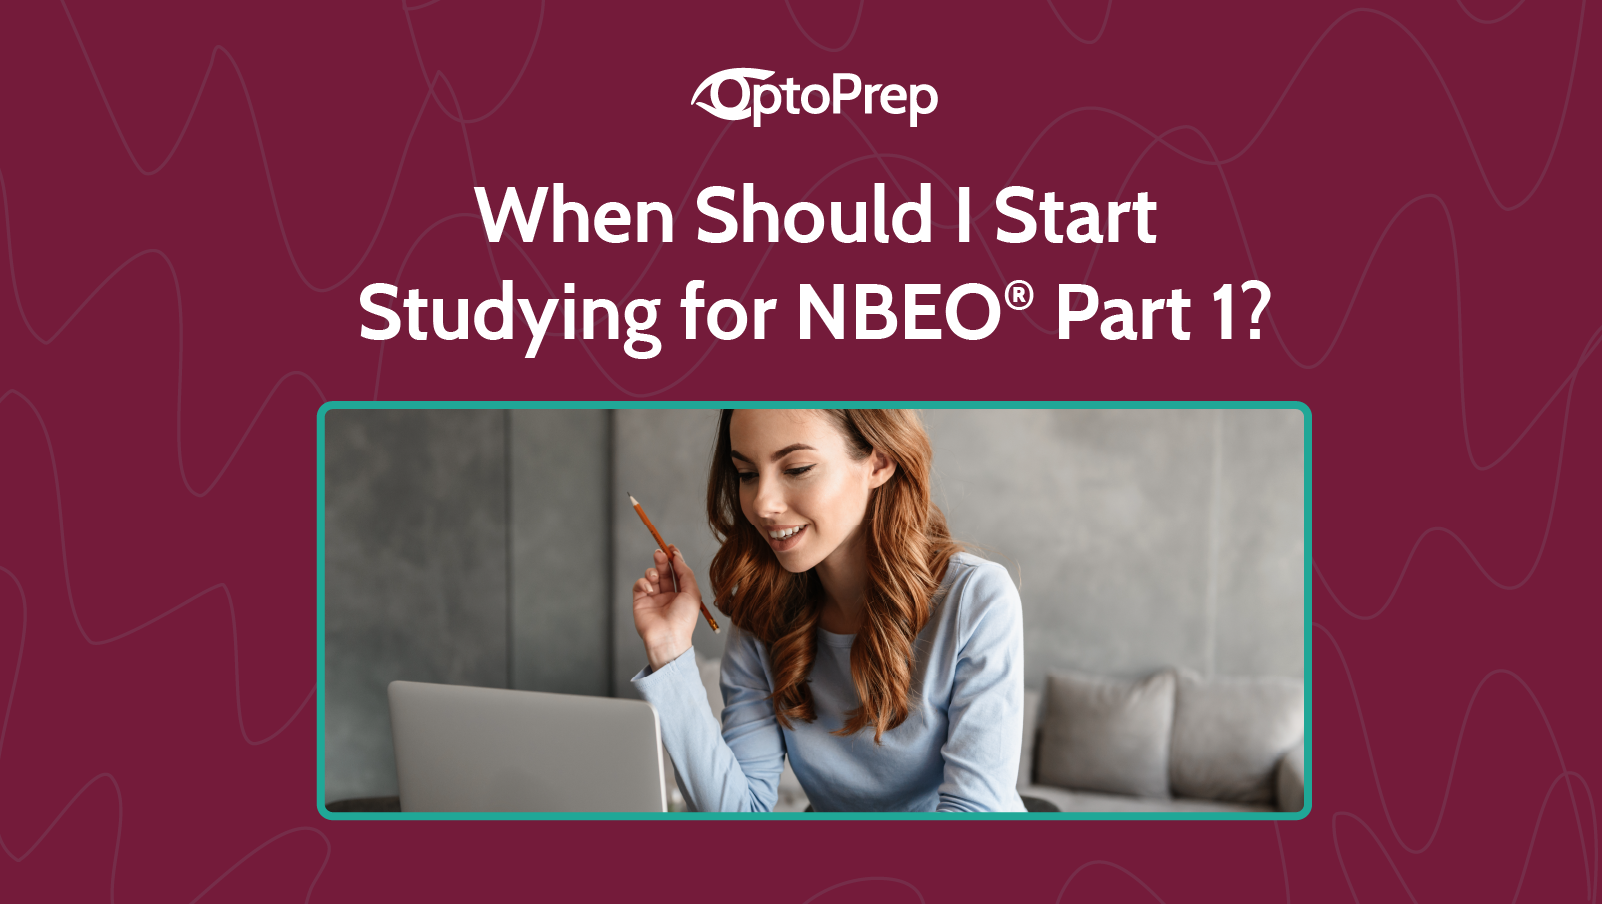 When should I start studying for NBEO Part 1?